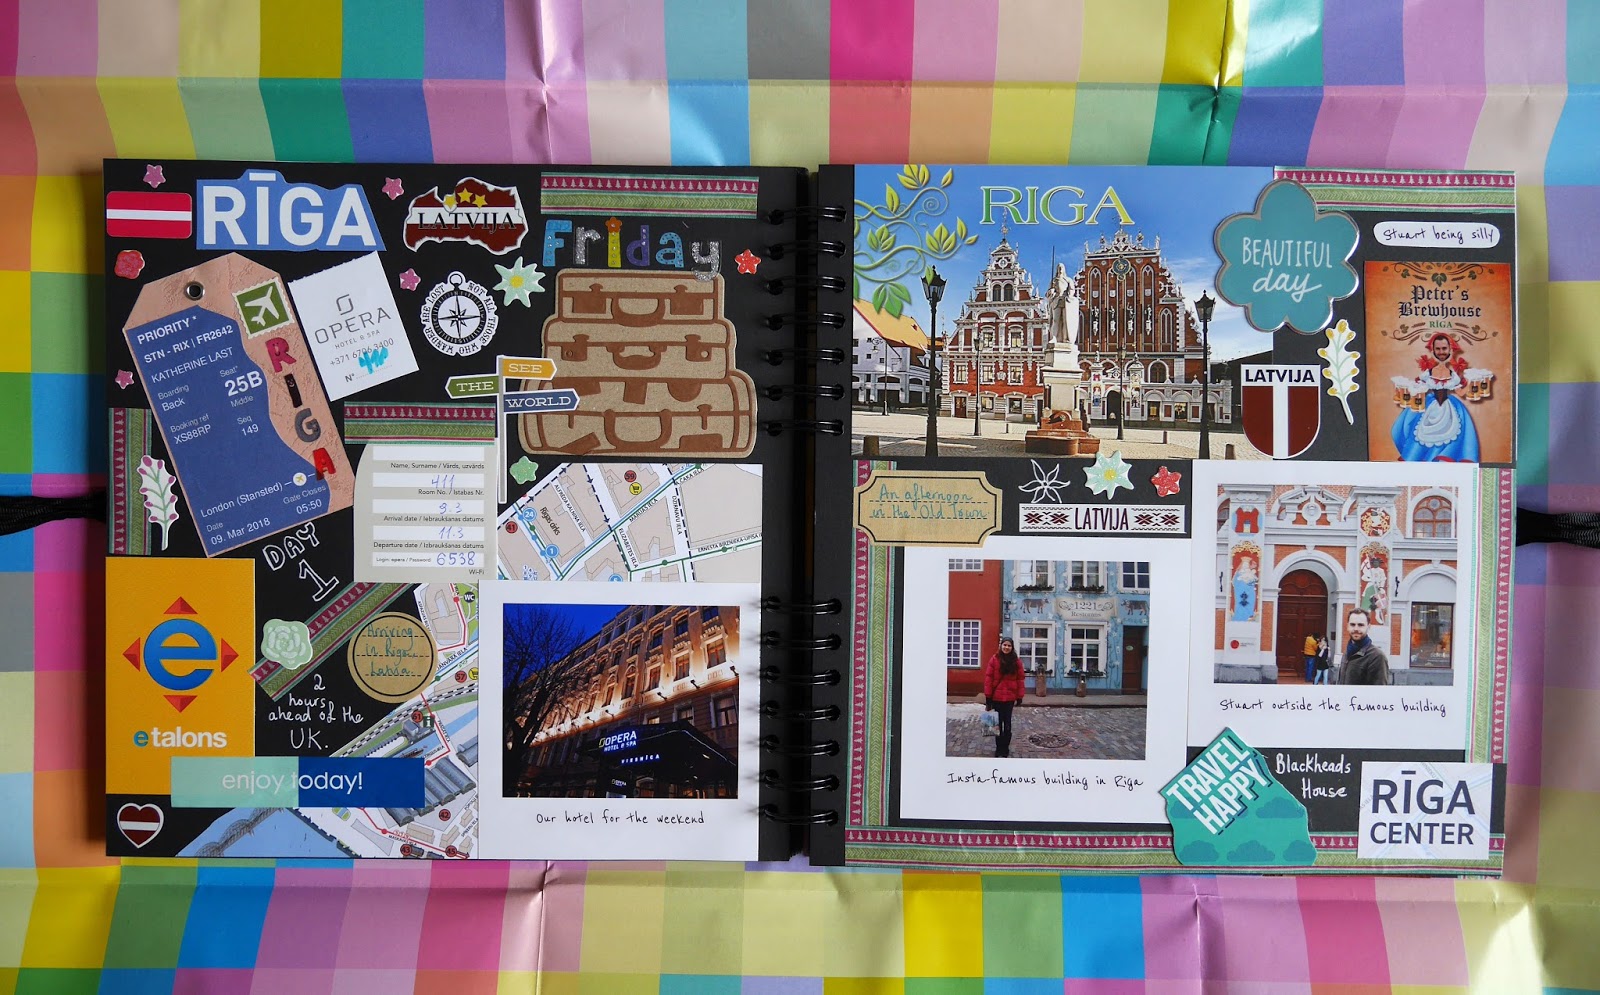 Pages 1 and 2 of the Riga section of my travel scrapbook - arriving in Latvia and exploring Riga's Old Town